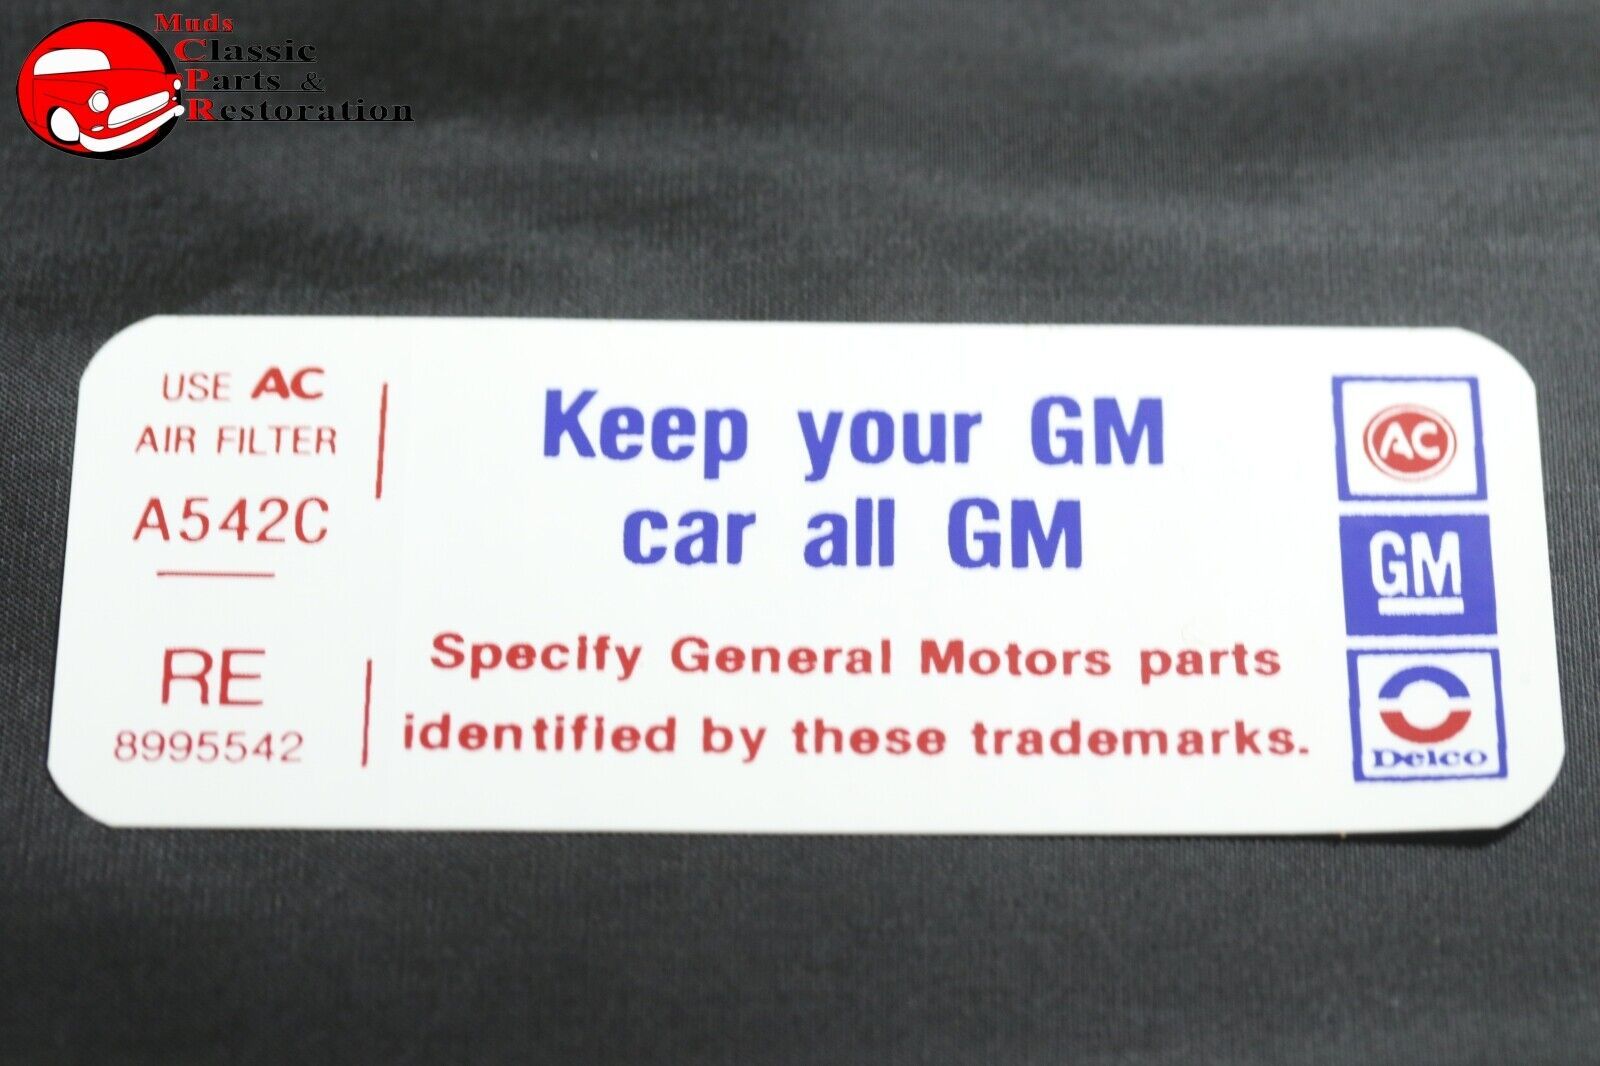 77 Pontiac V8-2V Keep Your GM All GM Air Cleaner Decal RE 8995542 Filter A542C - $1,009.67